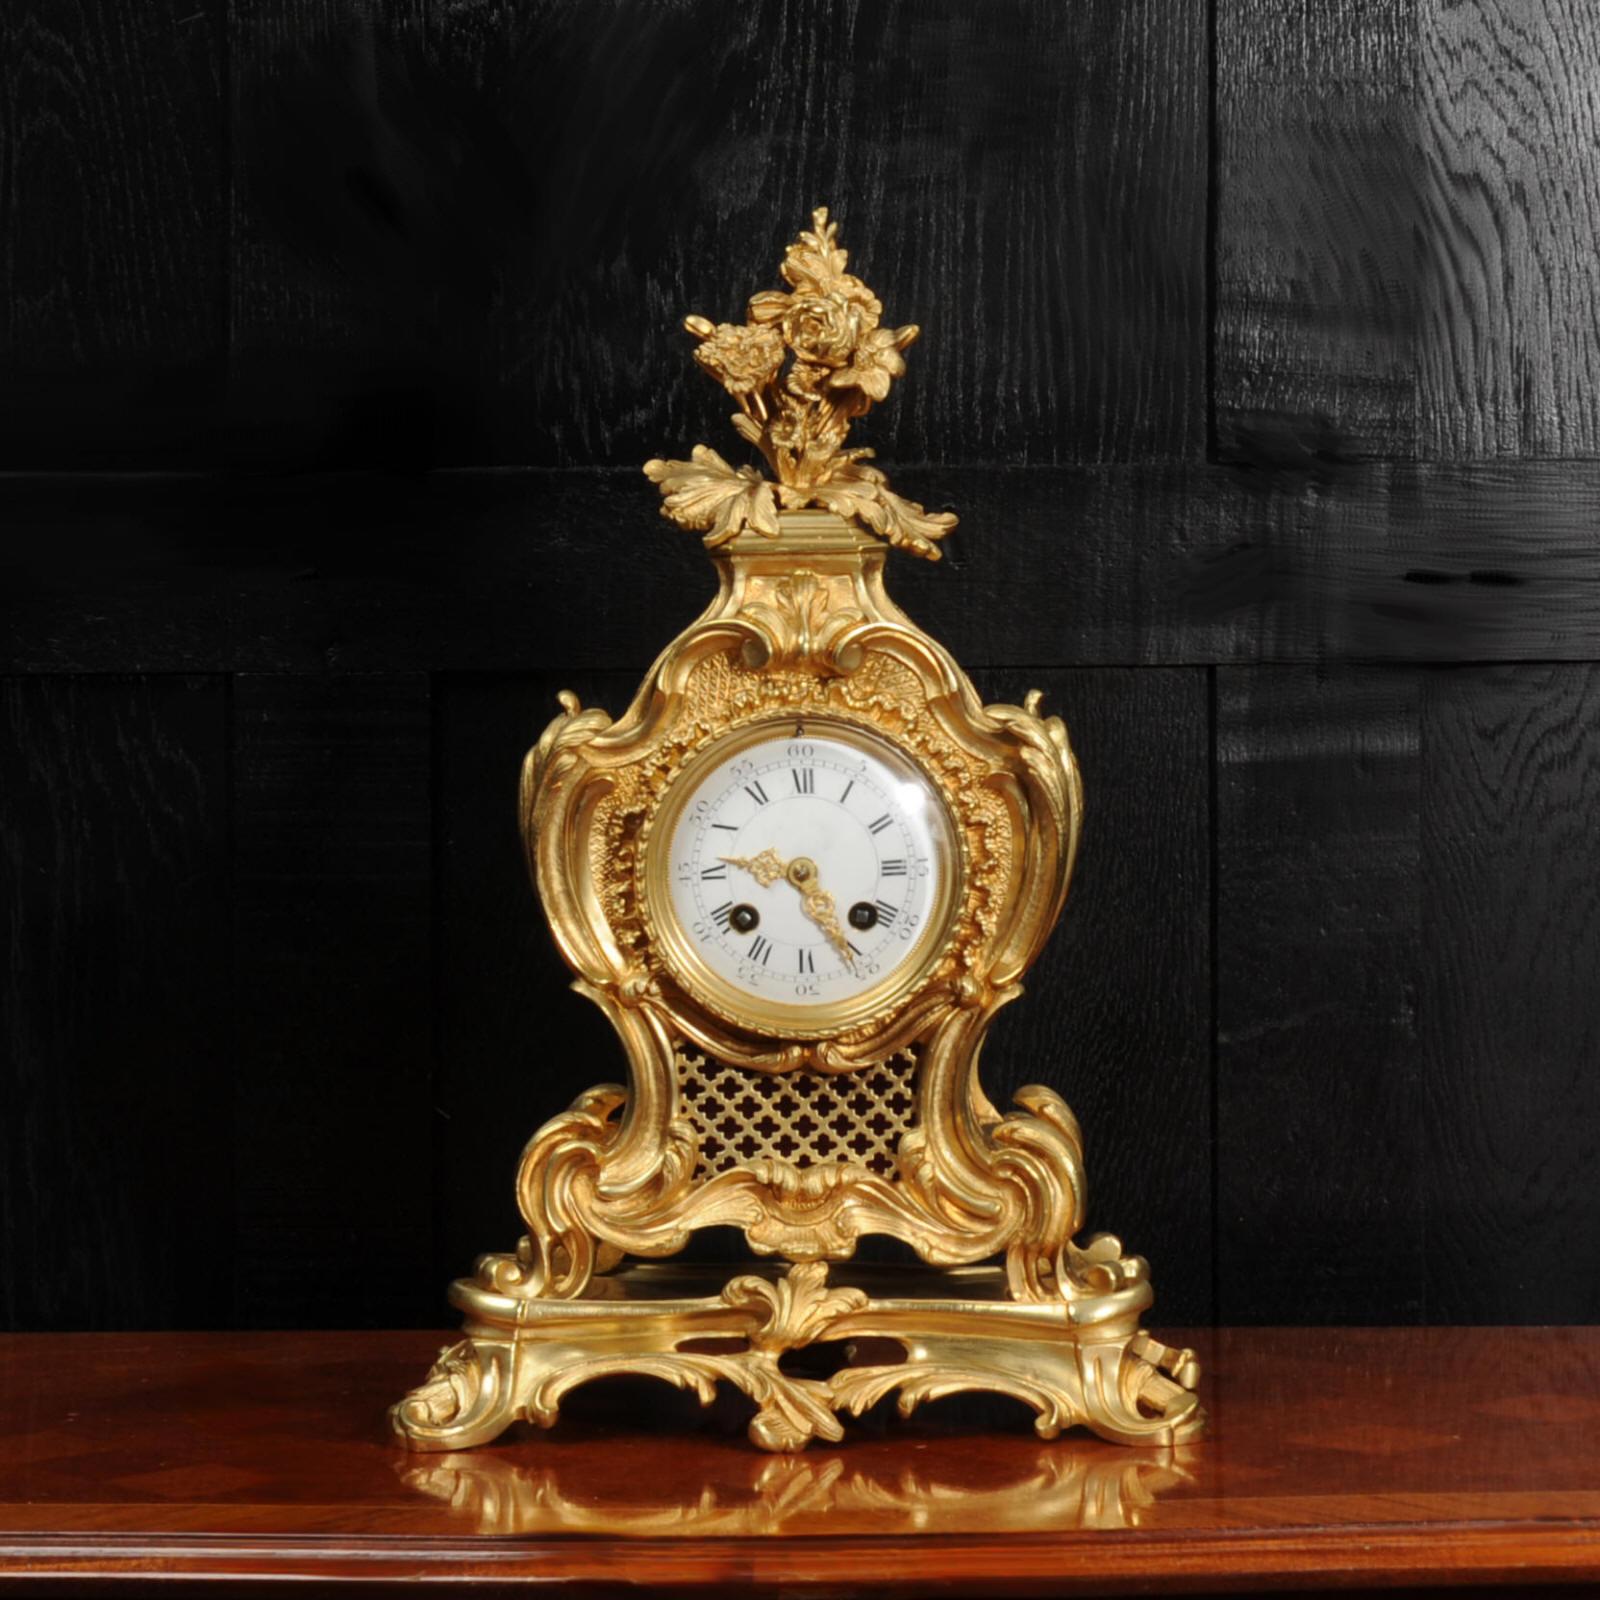 A stunning original antique French Rococo clock by Japy Frères. It is beautifully sculptured with finely finished scrolls, curves and acanthus leaves in finely gilded bronze. To the top is a Rococo flourish of flowers and foliage. Panels backed with